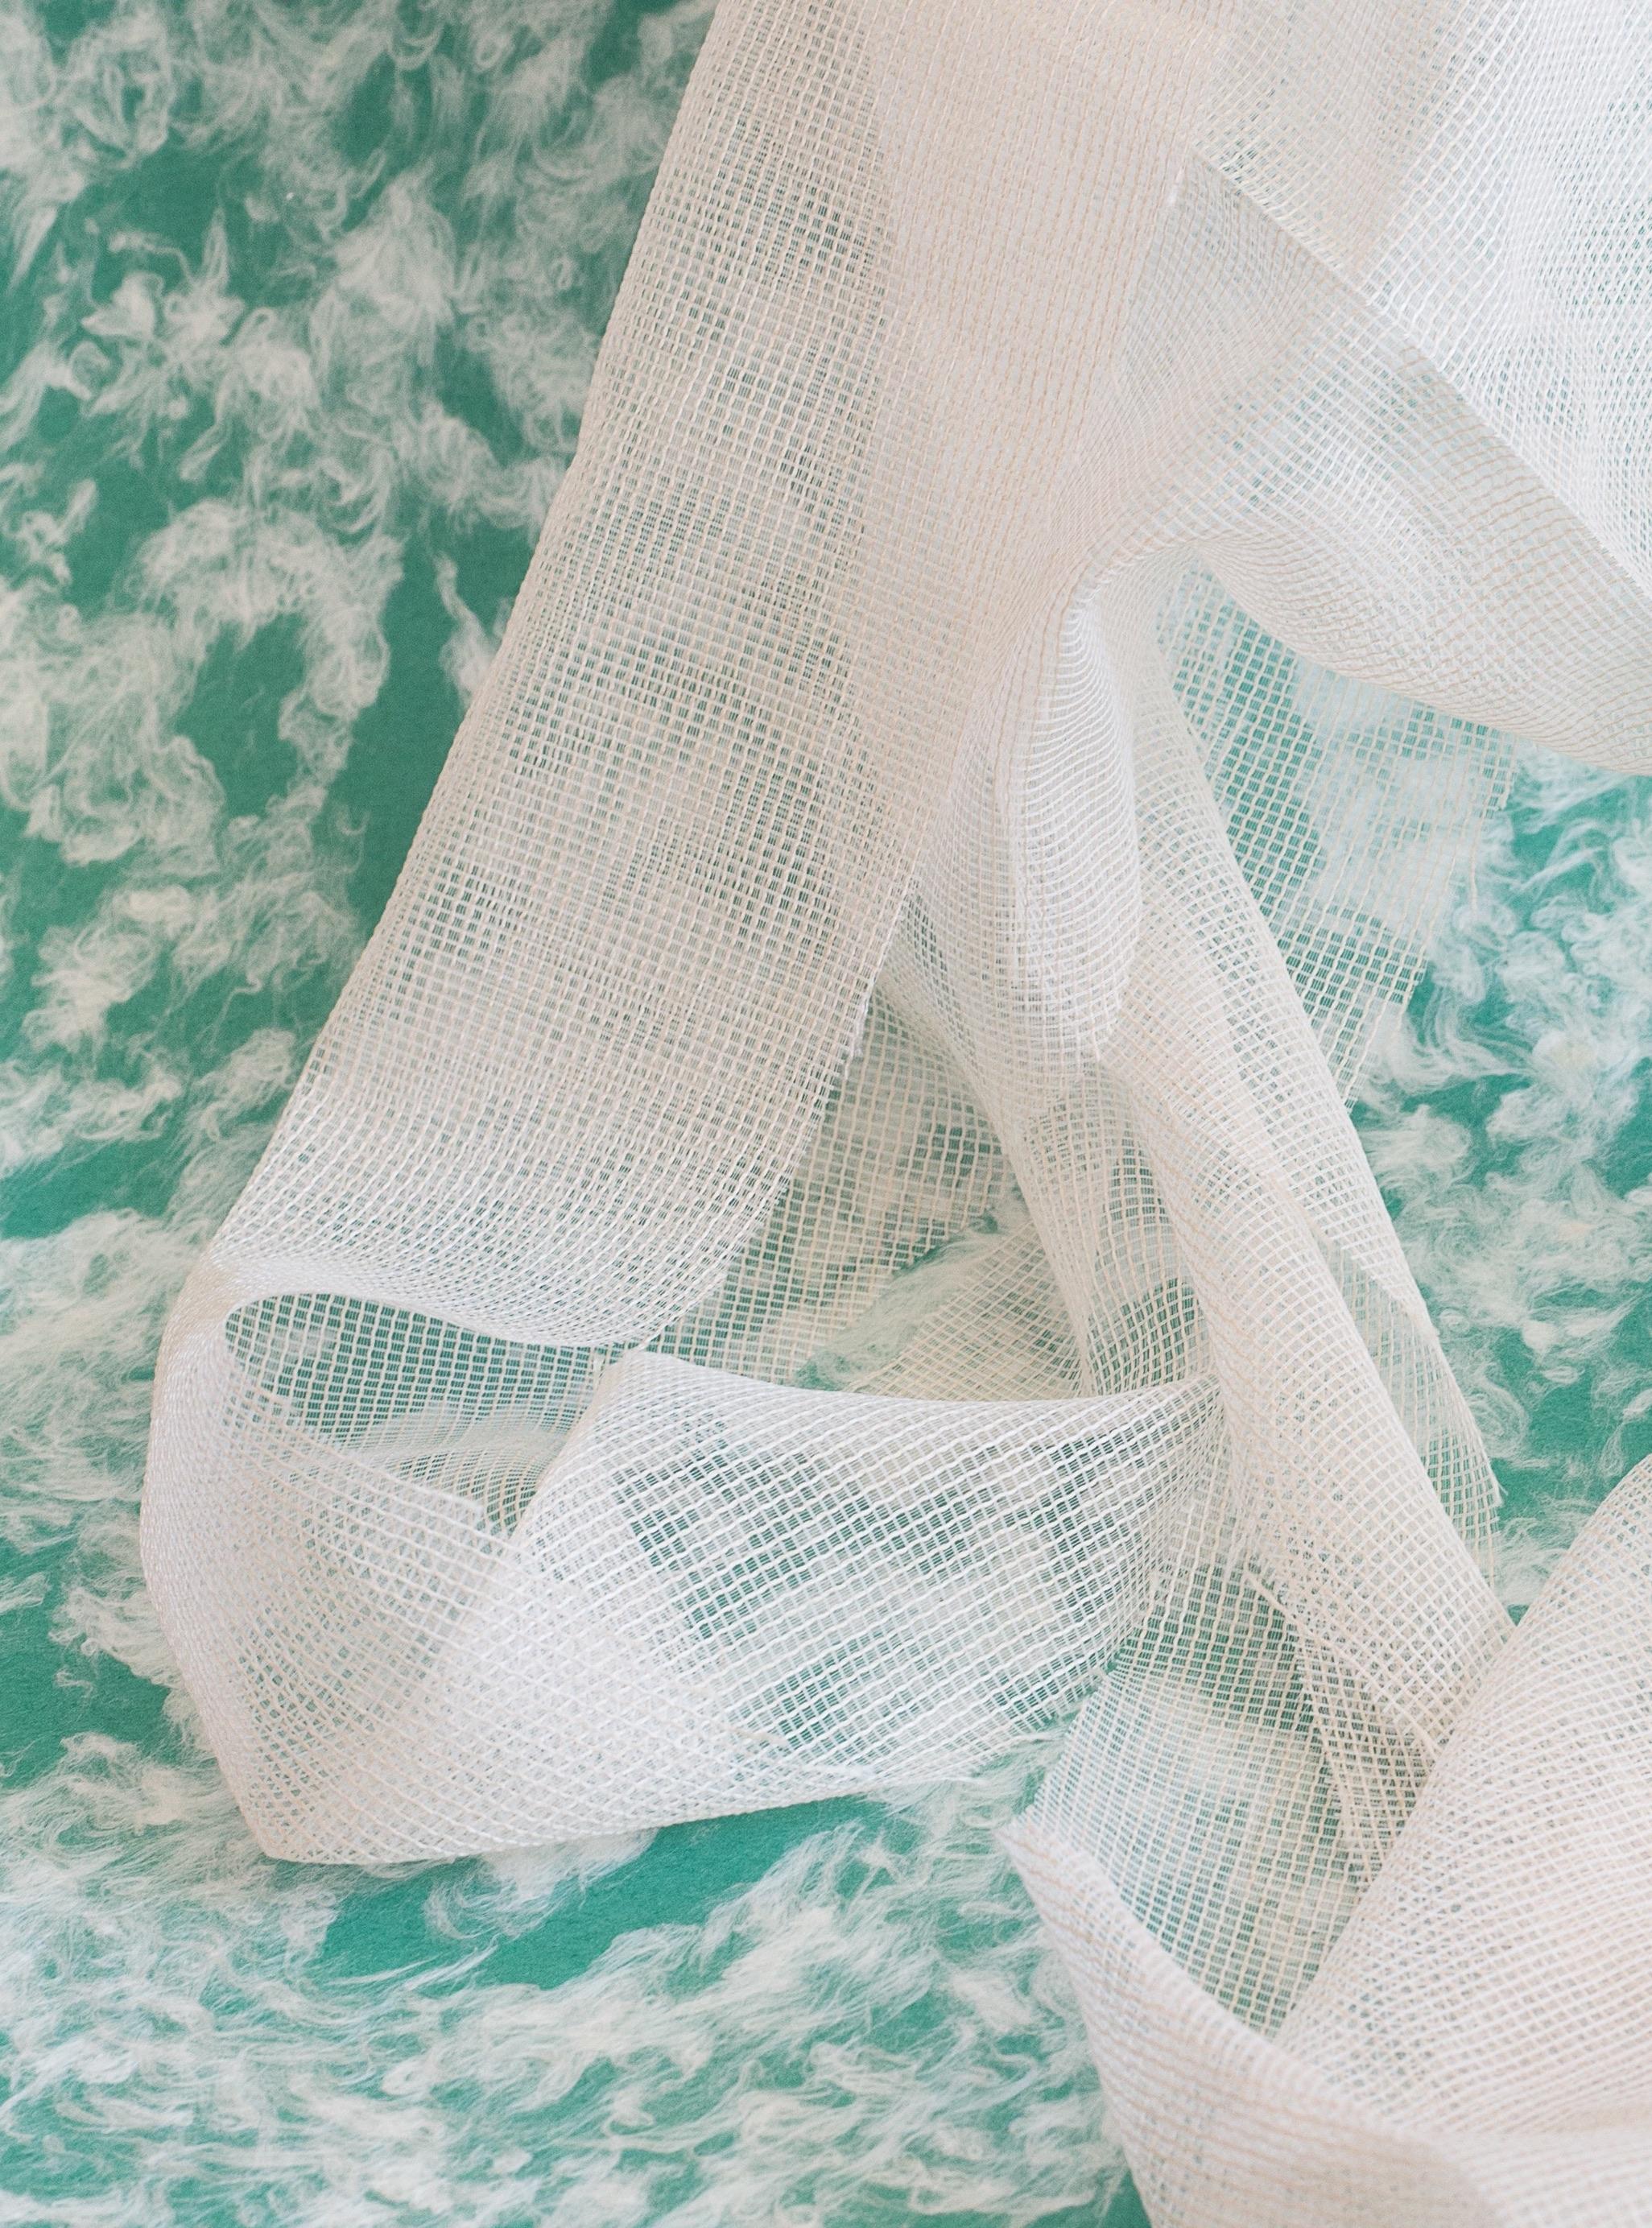 the precise location (of a place) - Turquoise photo, draped white fabric (24x36) - Print by Alison Postma